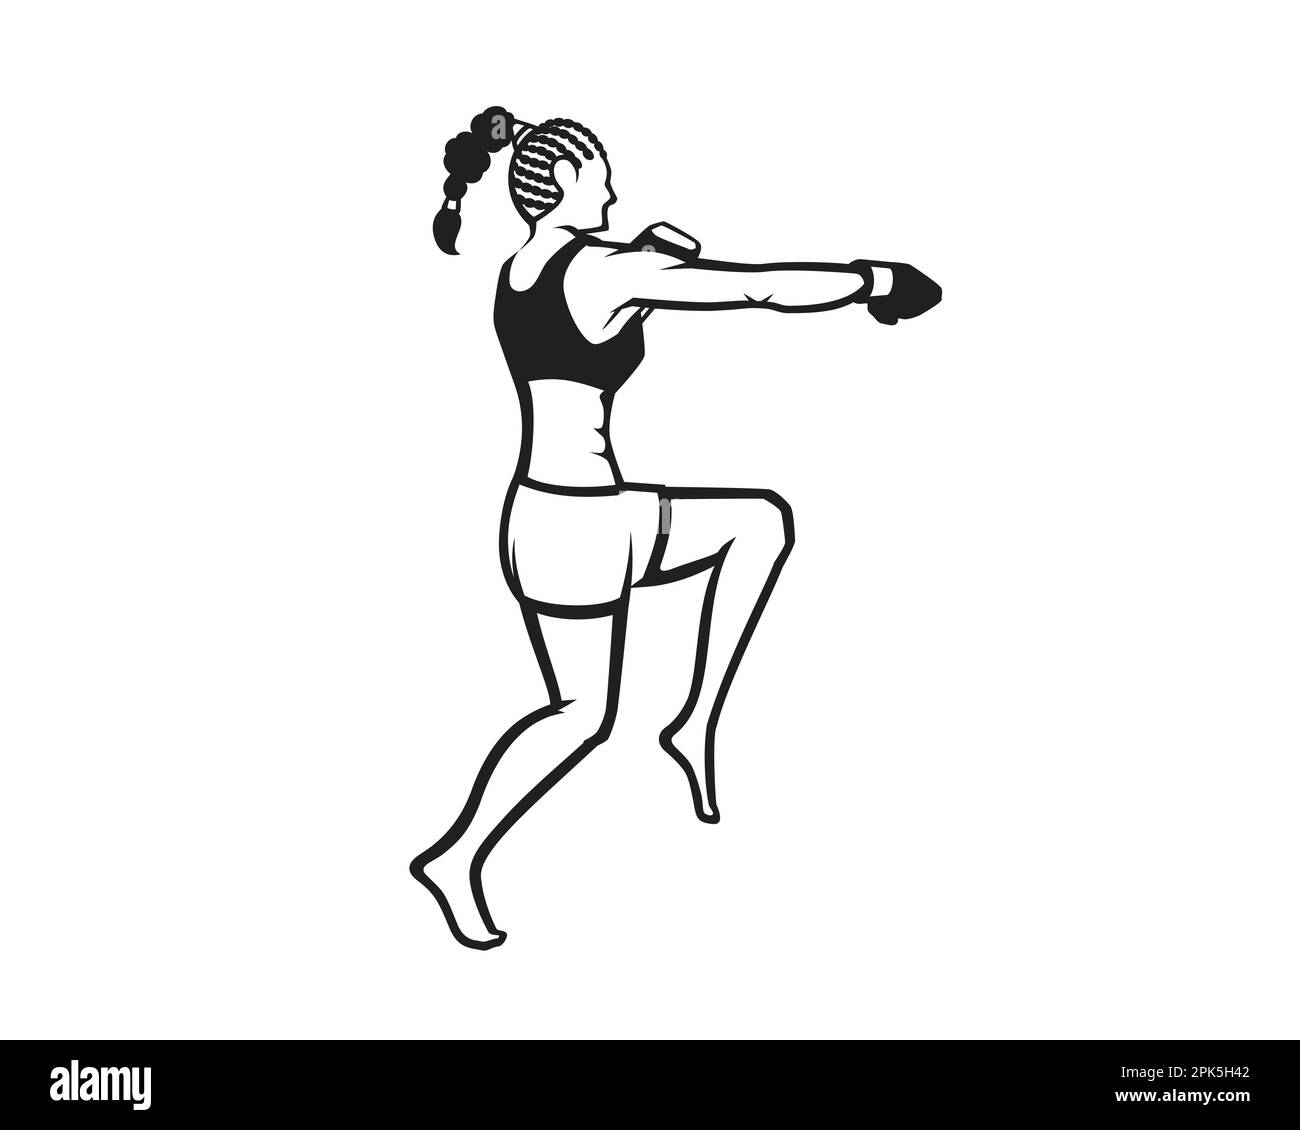 MMA or Kickboxing Woman Fighter Illustration visualized with Silhouette Style Stock Vector